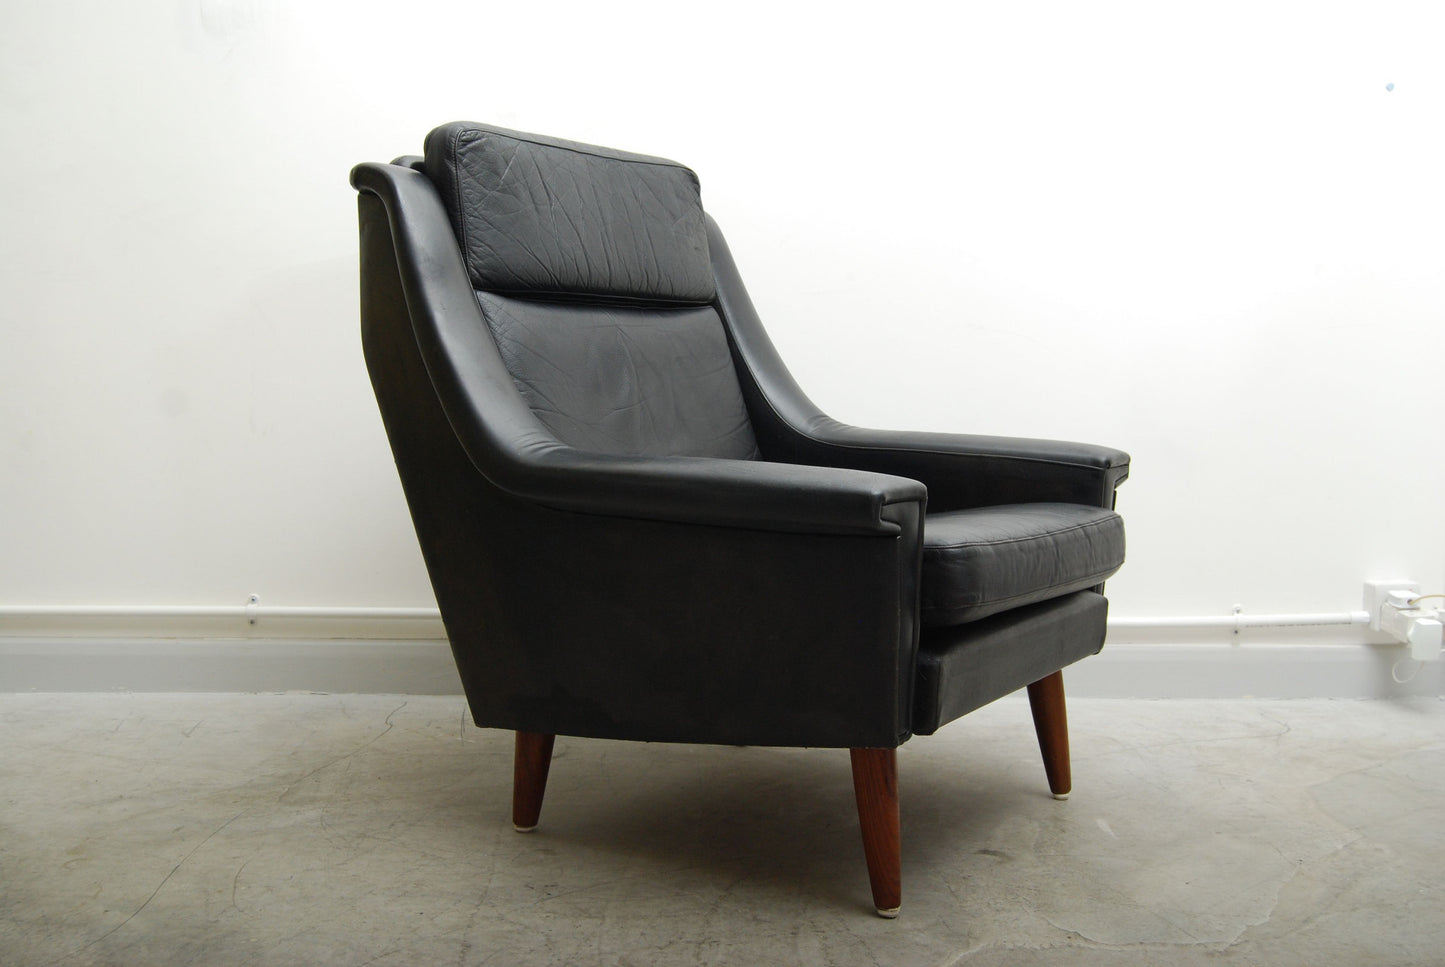 New price: Black leather lounge chair